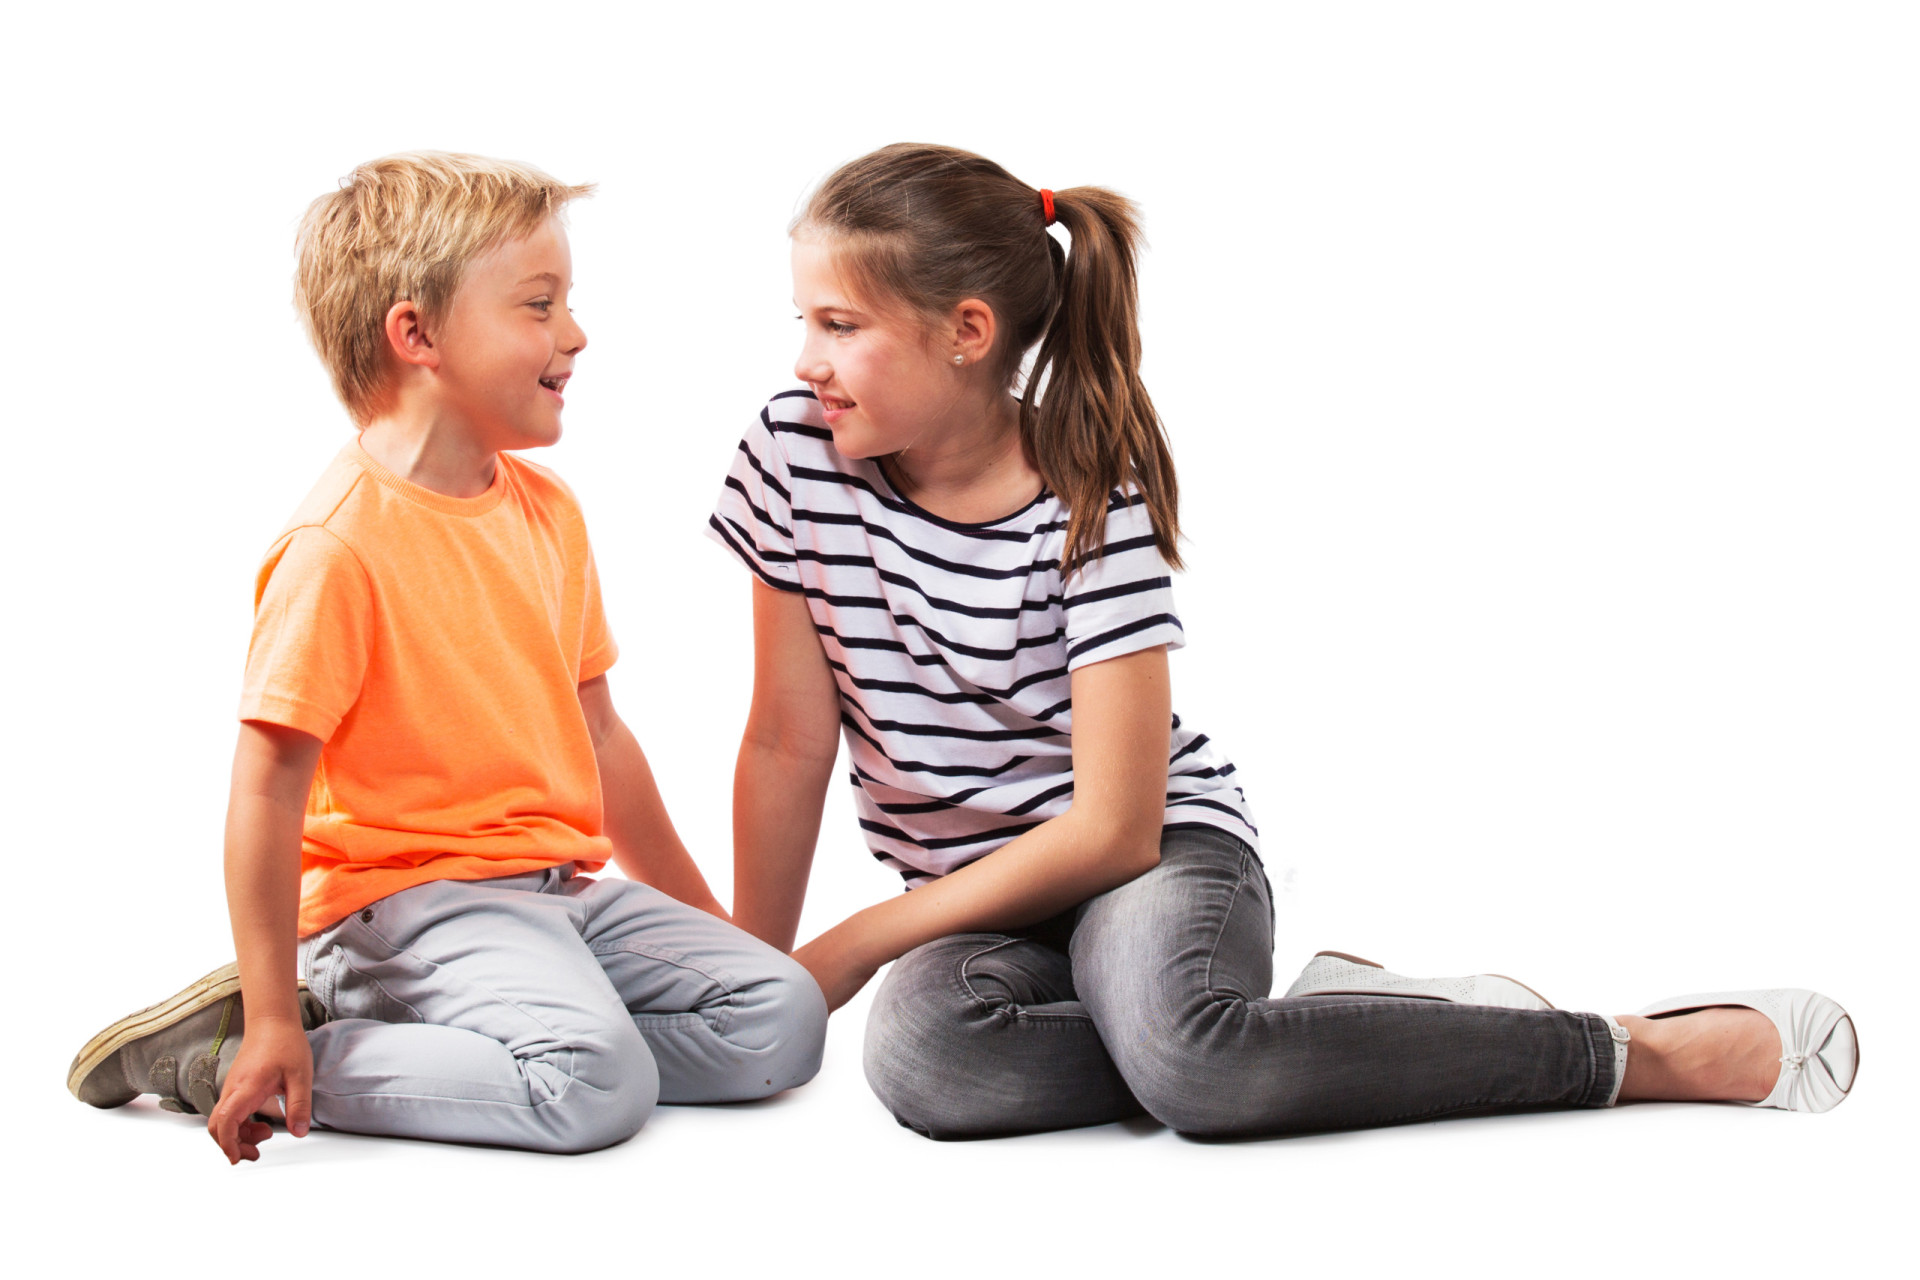 <p>Encouraging children to use gentle words and avoid hurtful language is a fundamental aspect of good manners. It paves the way for kinder, more positive interactions.</p><p><a href="https://www.msn.com/en-us/community/channel/vid-7xx8mnucu55yw63we9va2gwr7uihbxwc68fxqp25x6tg4ftibpra?cvid=94631541bc0f4f89bfd59158d696ad7e">Follow us and access great exclusive content every day</a></p>